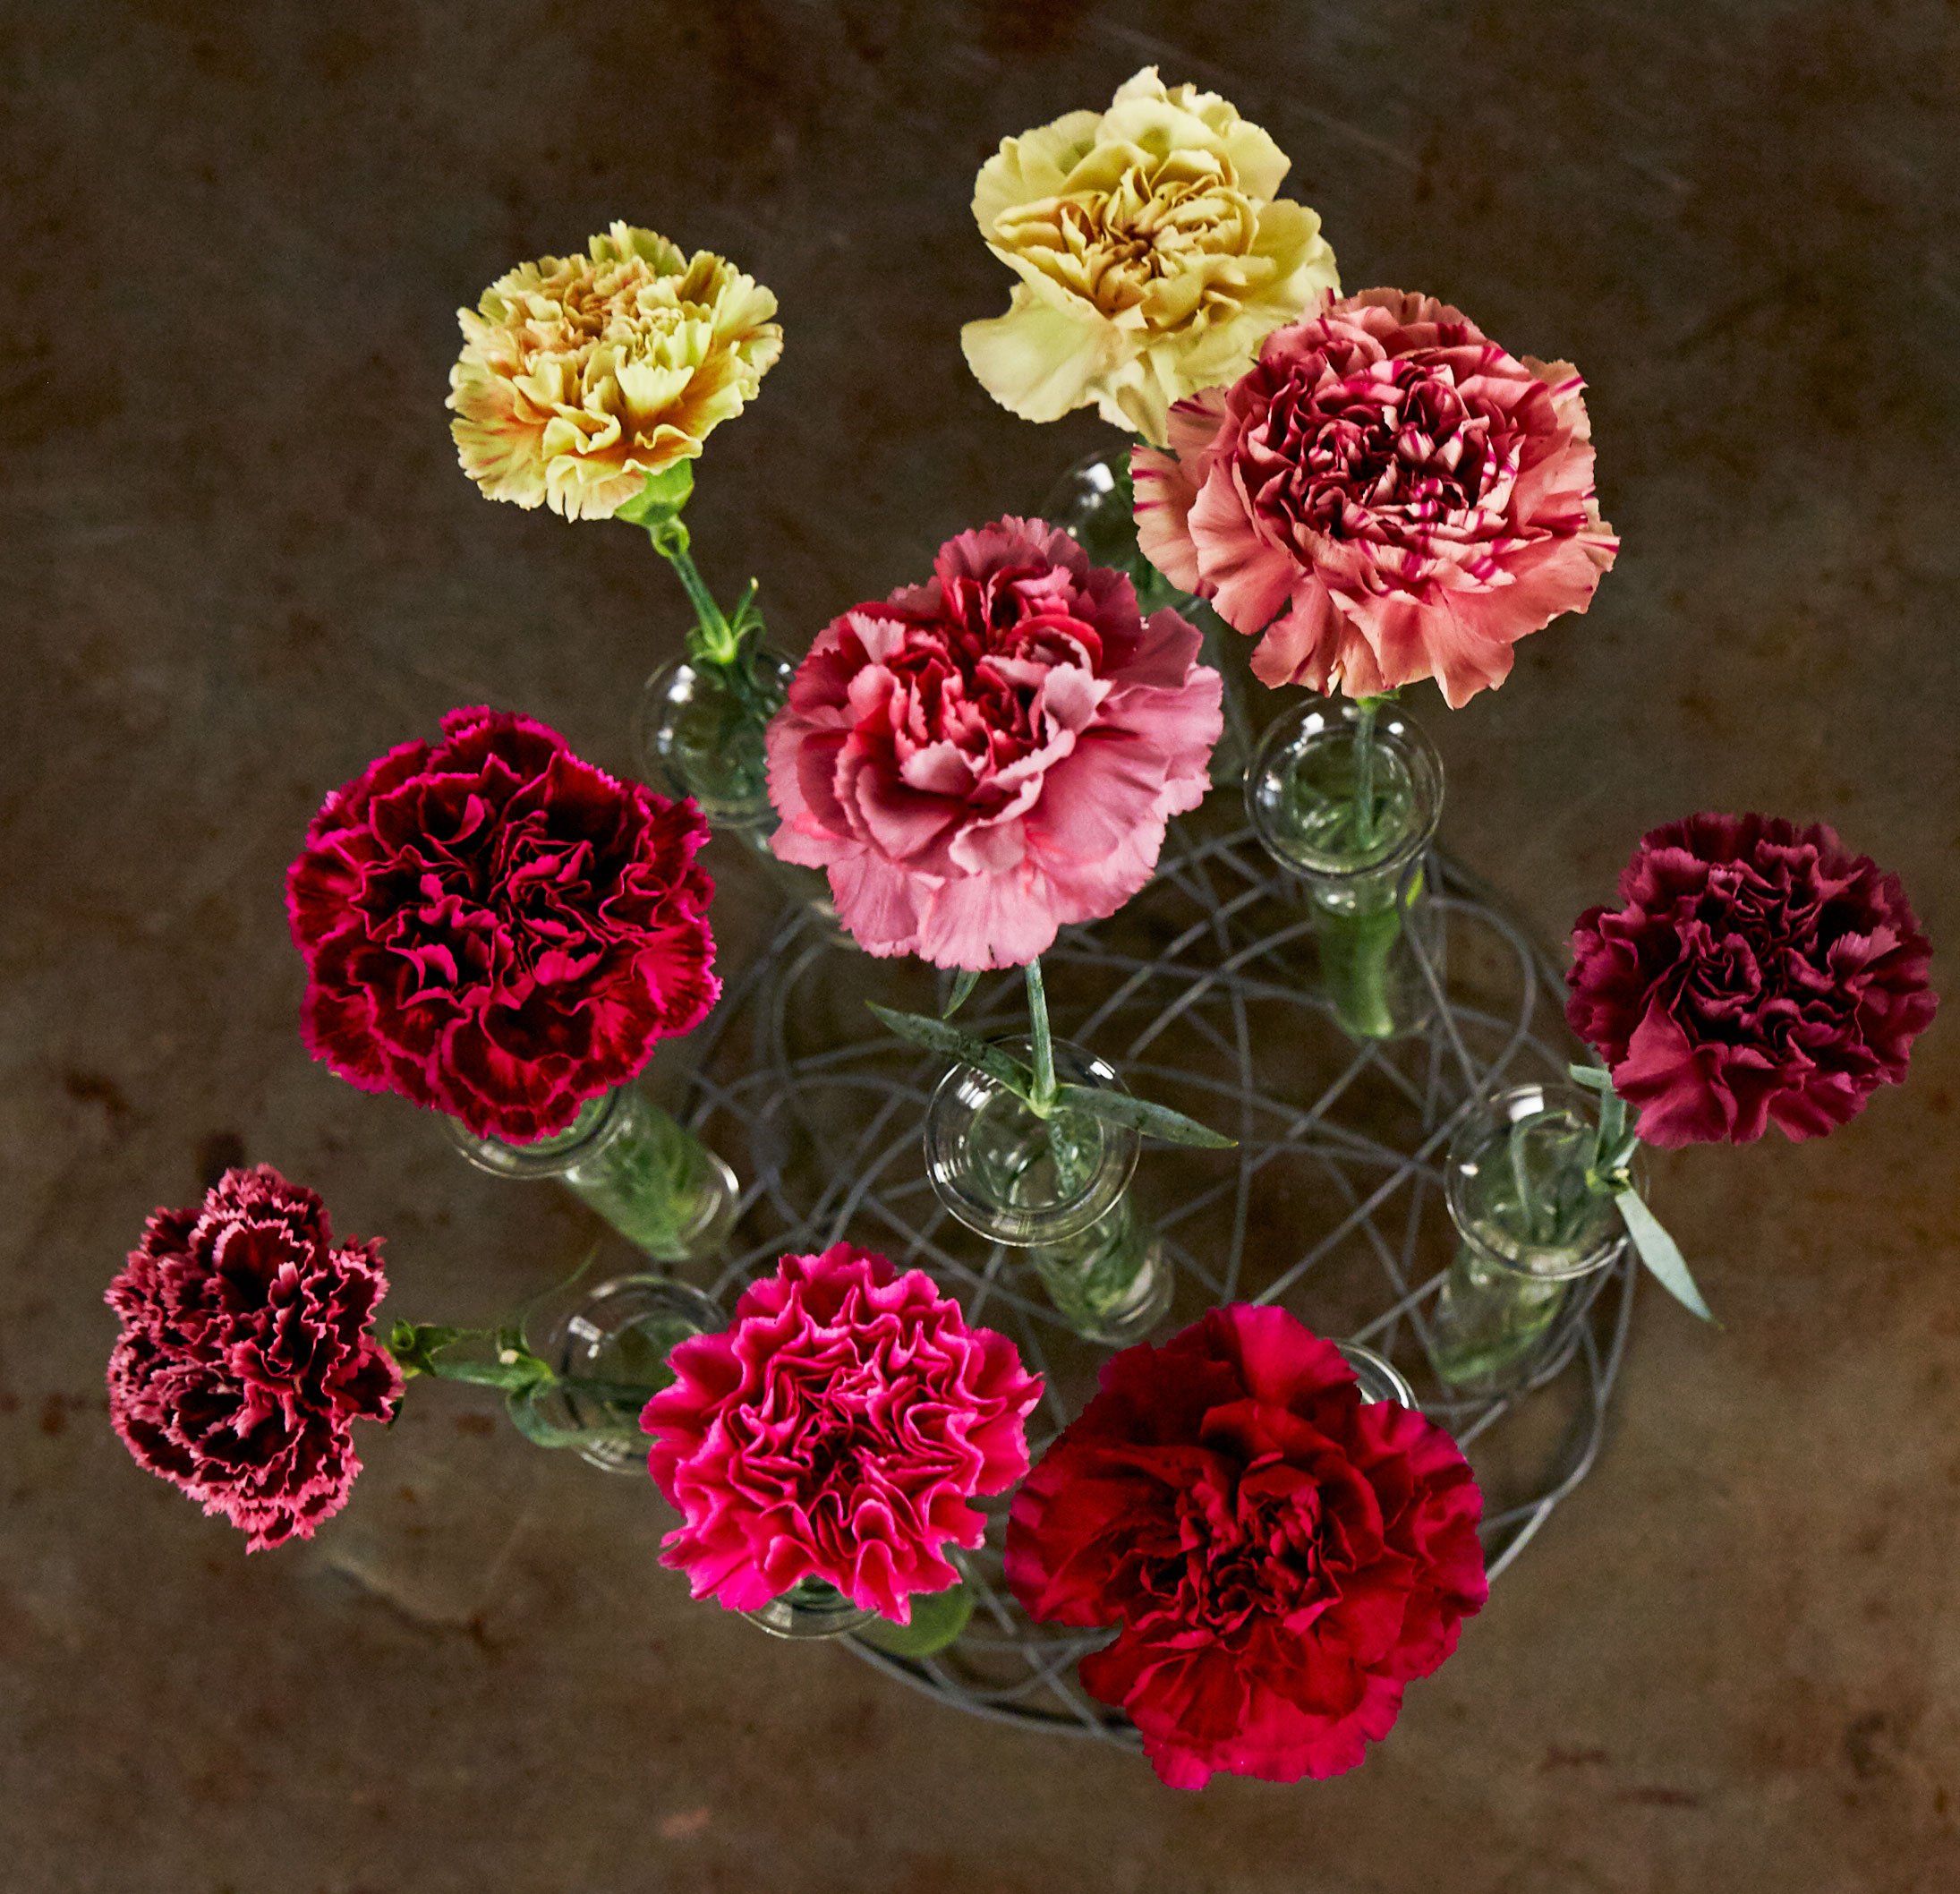 J shares these NEW Unique Color Varieties of Carnations on Life in Bloom!